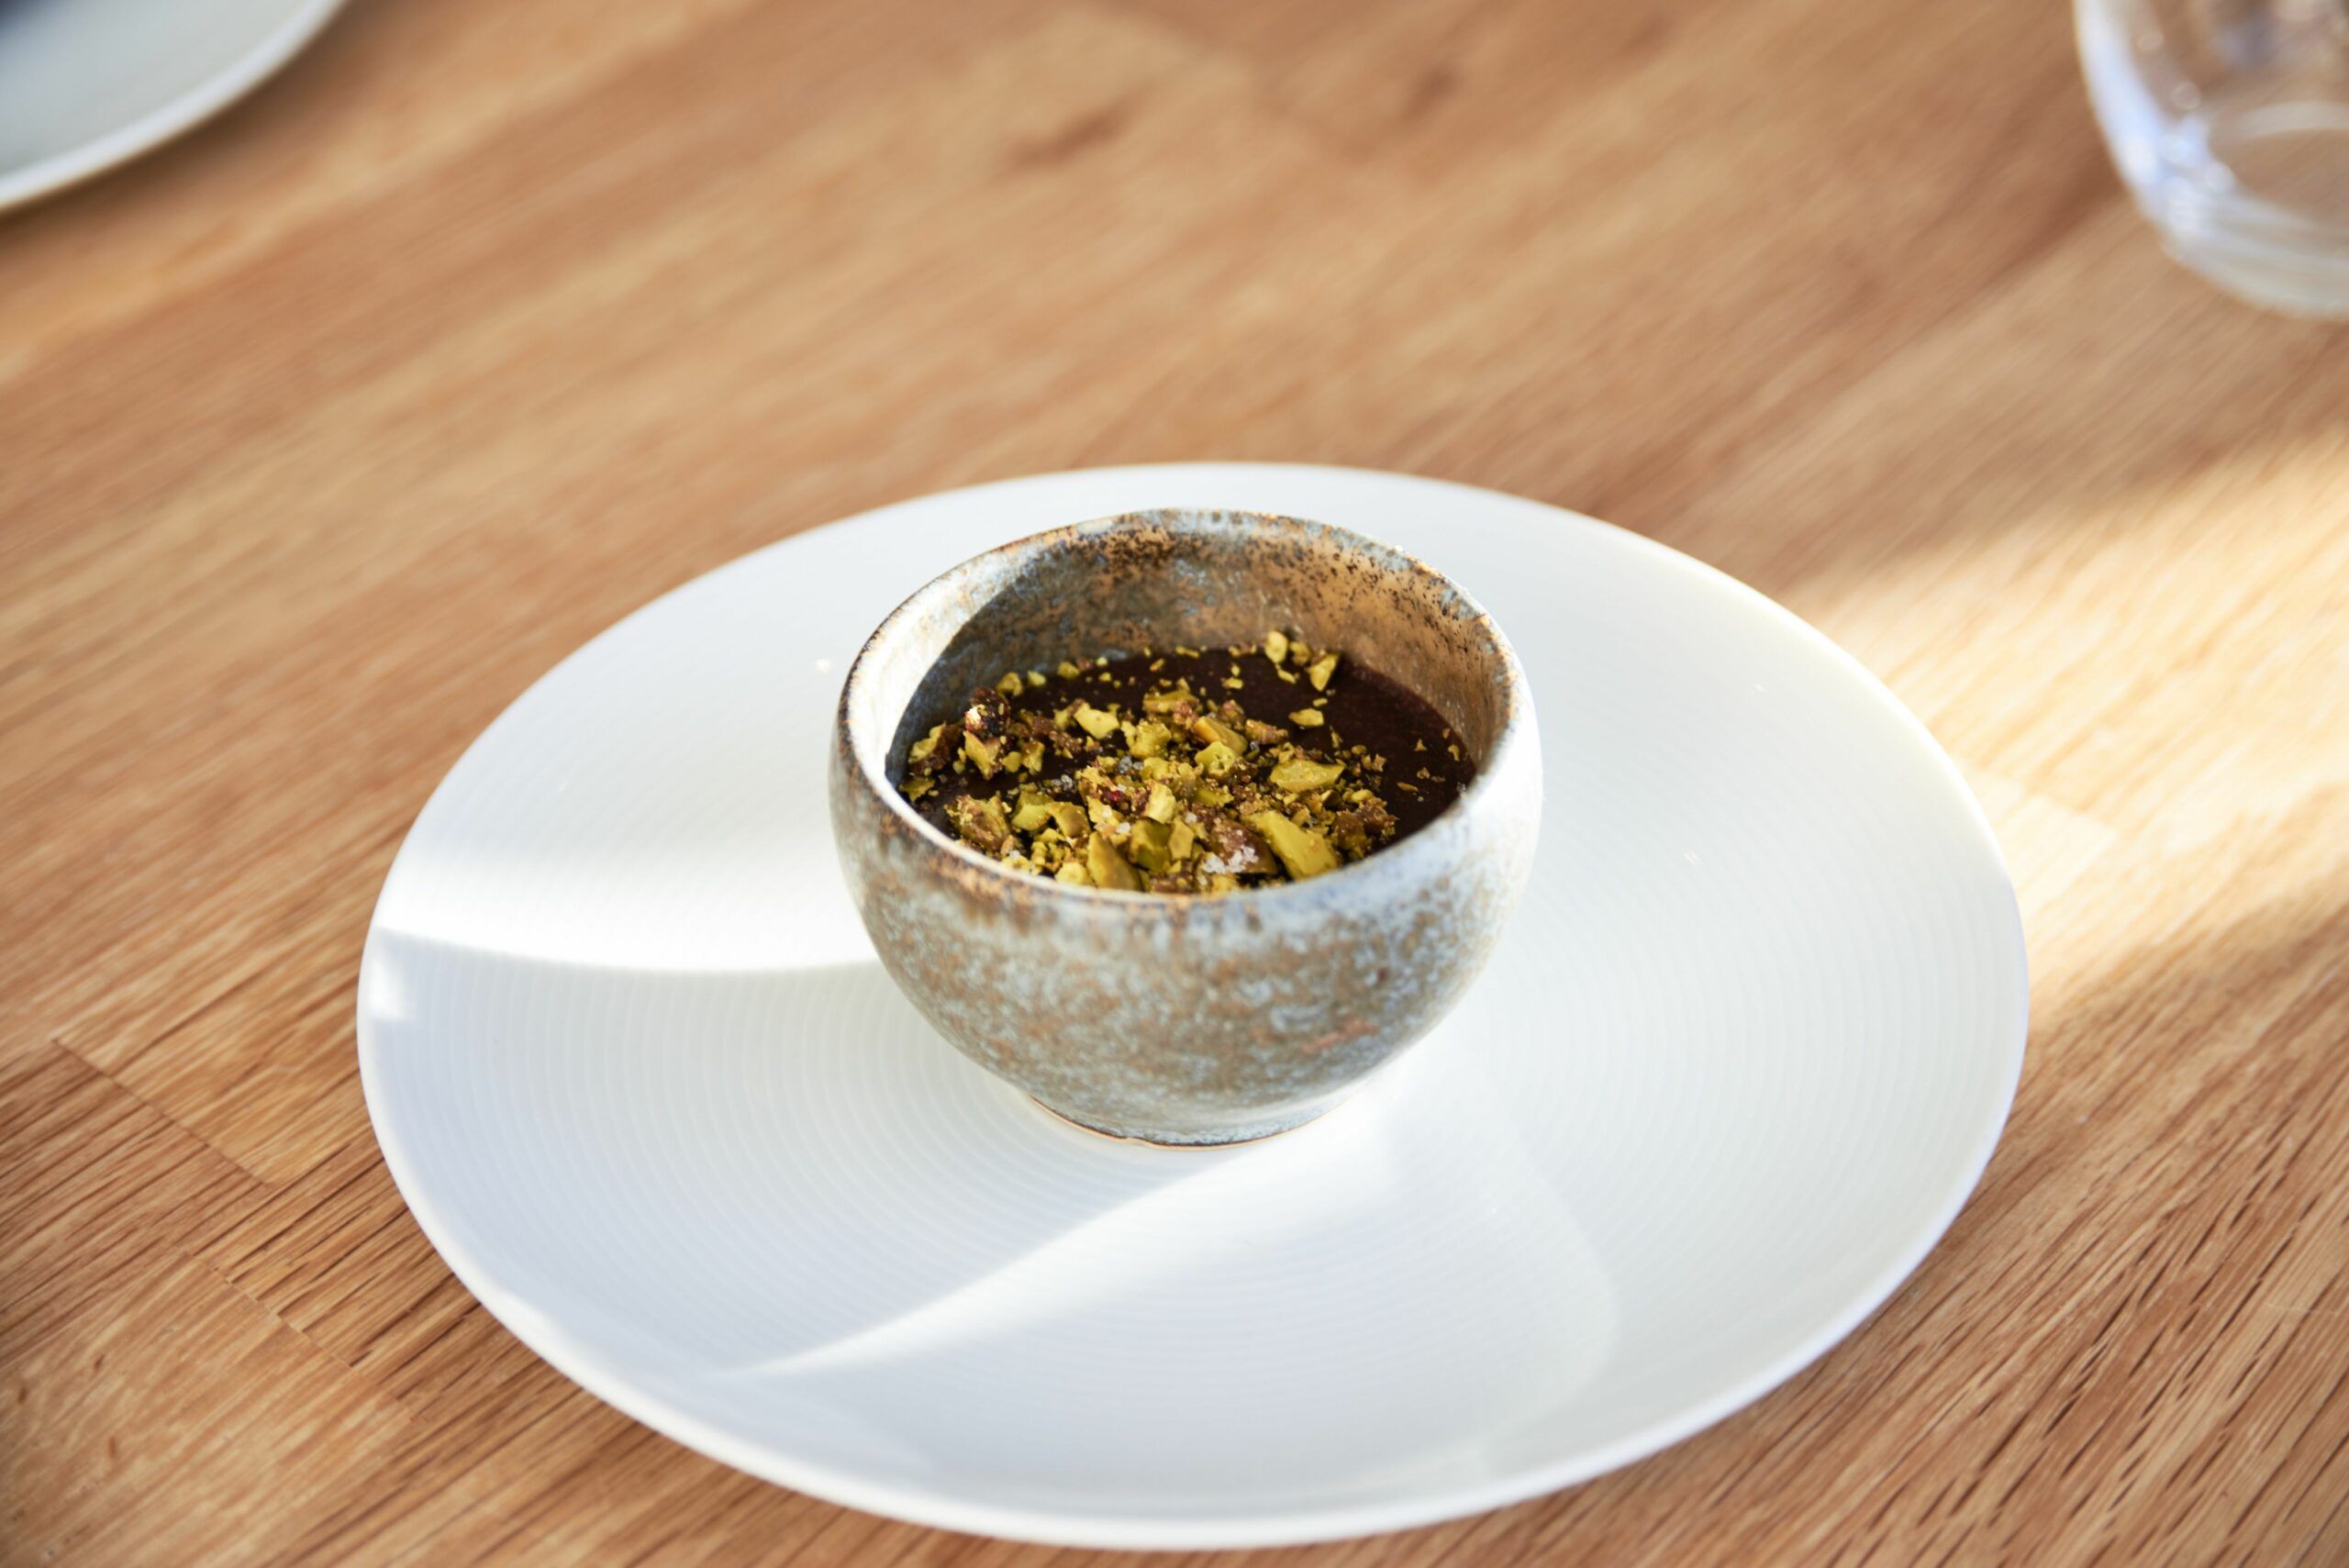 Hot Valhrona 70% Chocolate pudding  with pistachios in the top. Simple and delicious lunch menu at The Little Fish